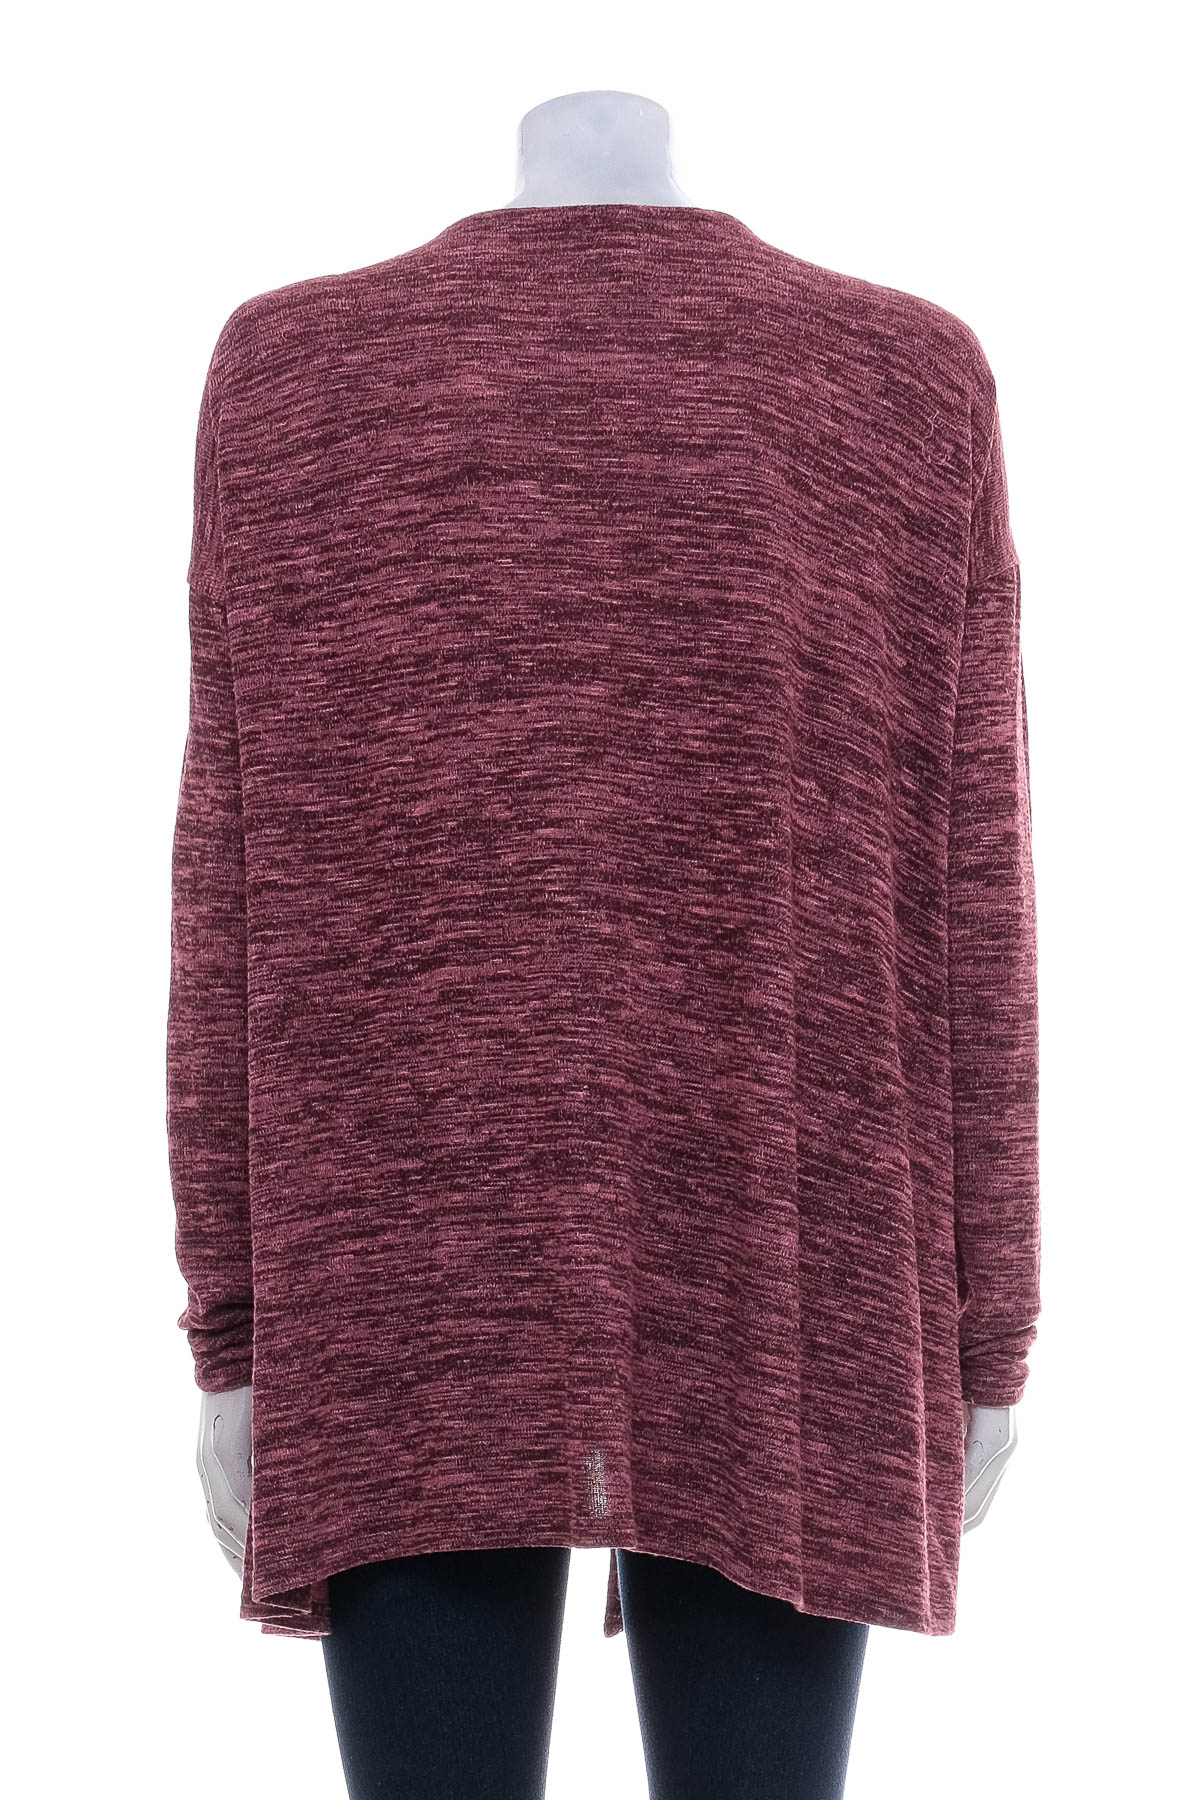 Women's cardigan - Colours of the world - 1